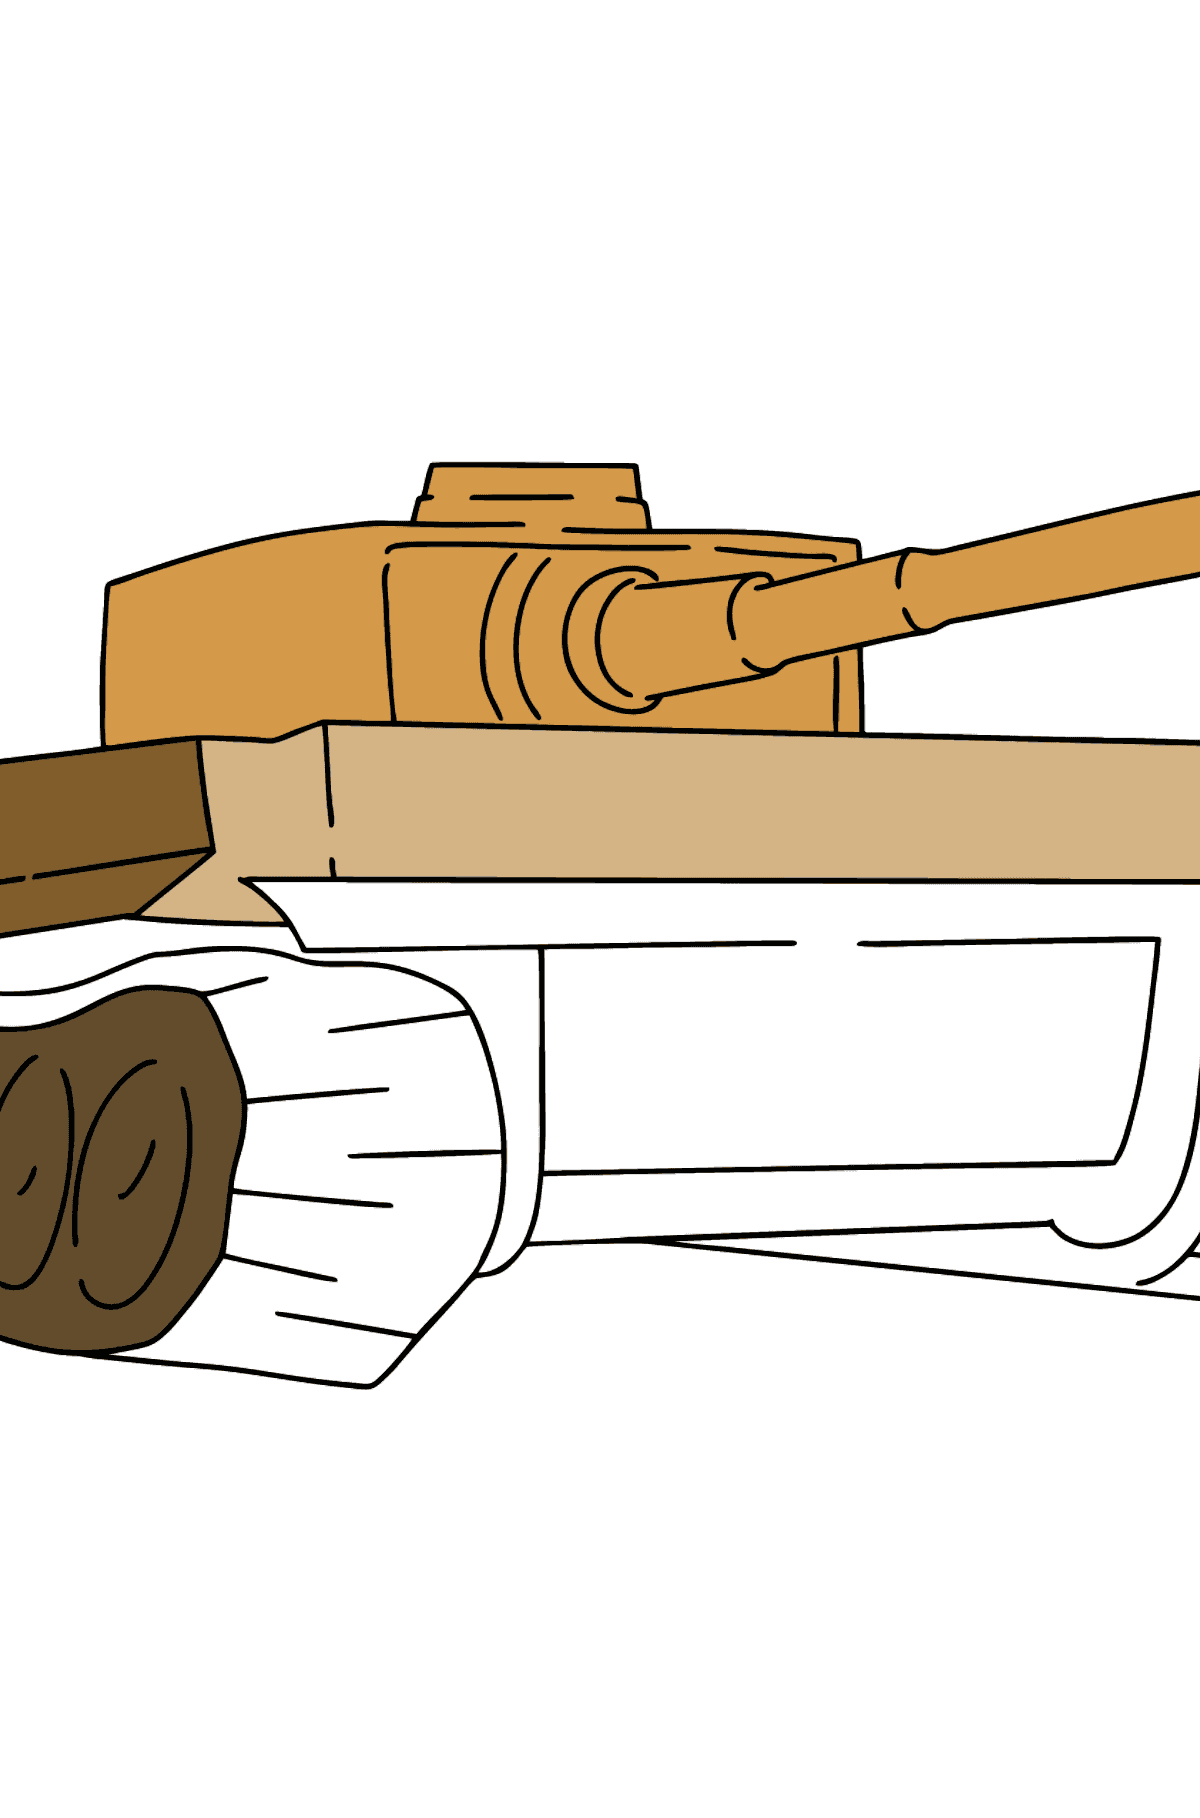 Tank Tiger coloring page - Coloring Pages for Kids